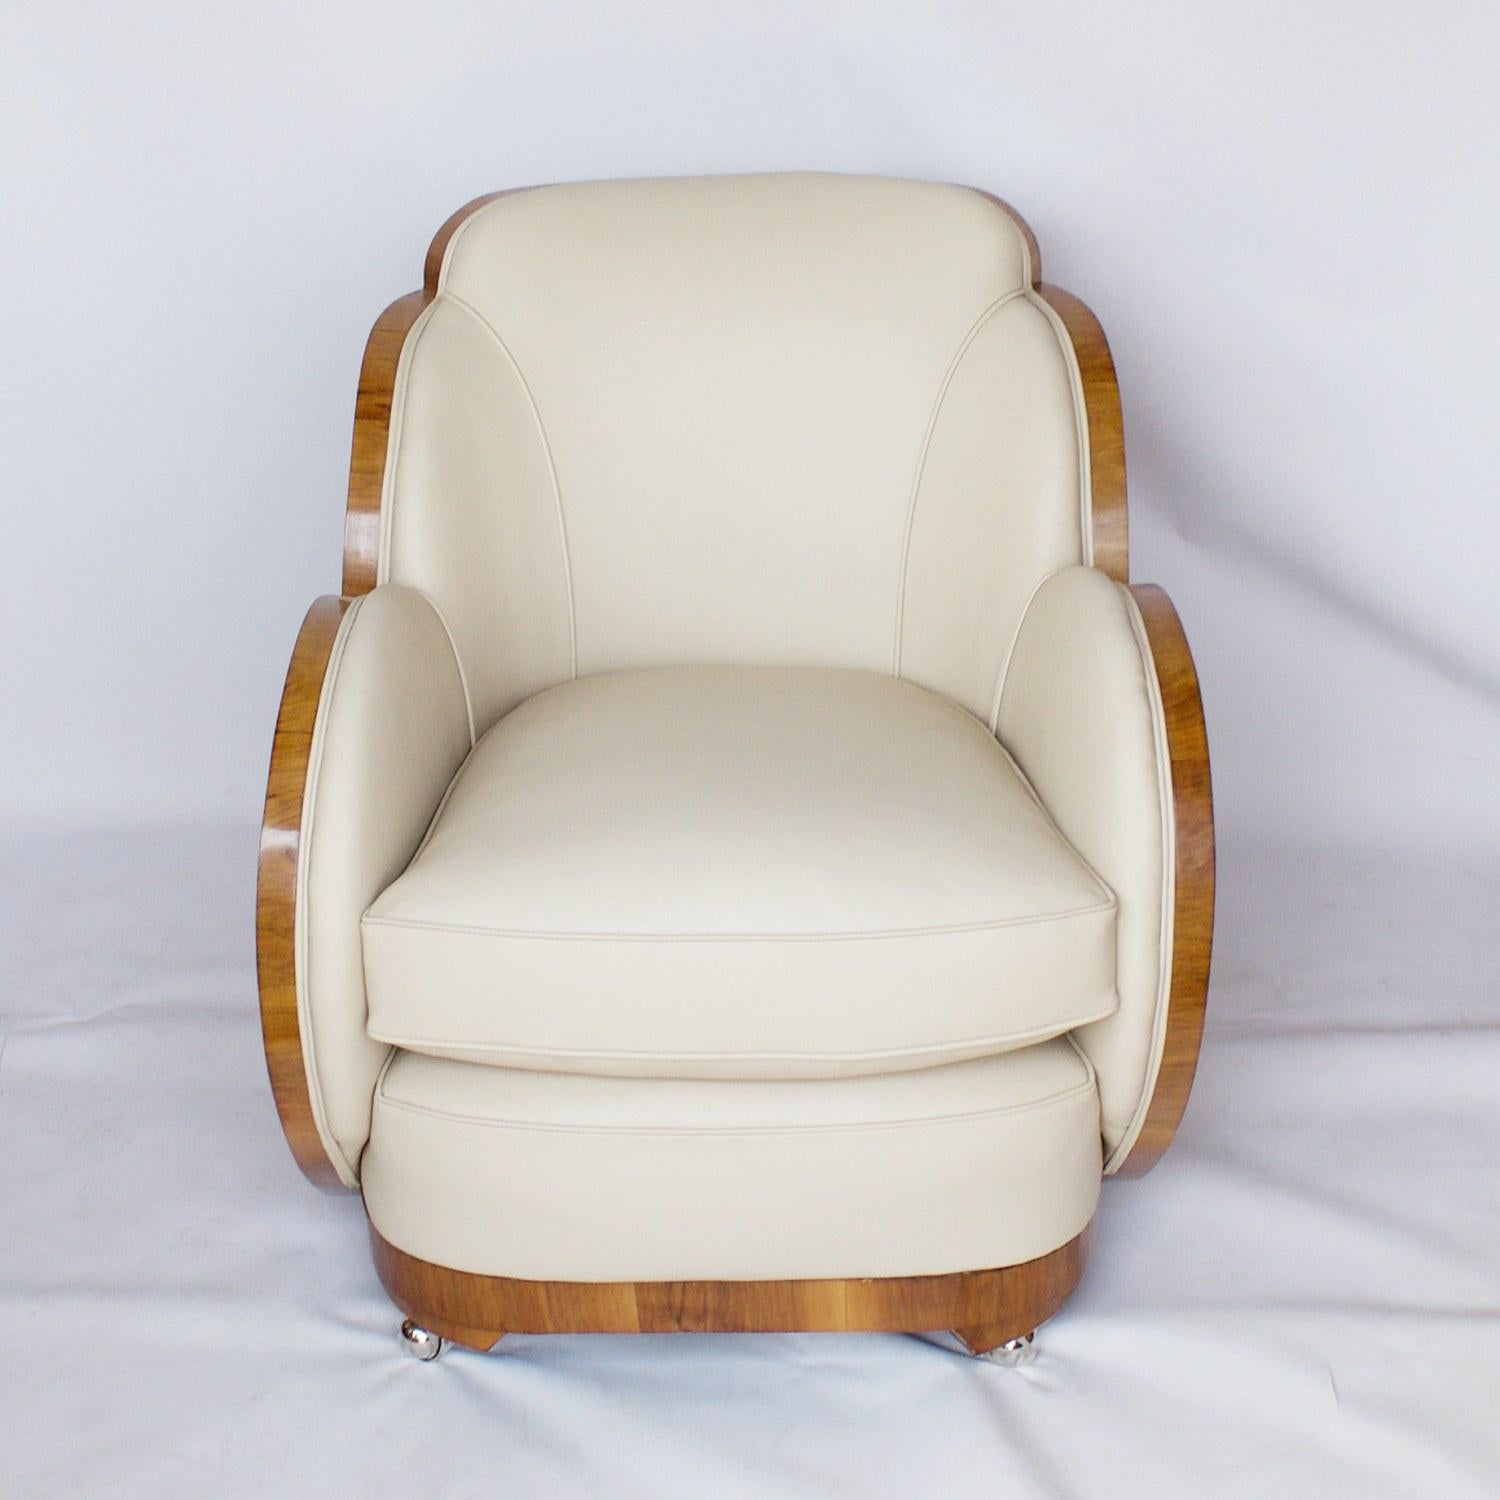 A pair of Art Deco Cloud chairs by Harry & Lou Epstein. Bleached figured walnut wrapped veneers with straight grain walnut banding. Set on modern replacement casters and re-upholstered in cream leather. 

Dimensions: H 80cm, W 75cm, D 95cm, seat H